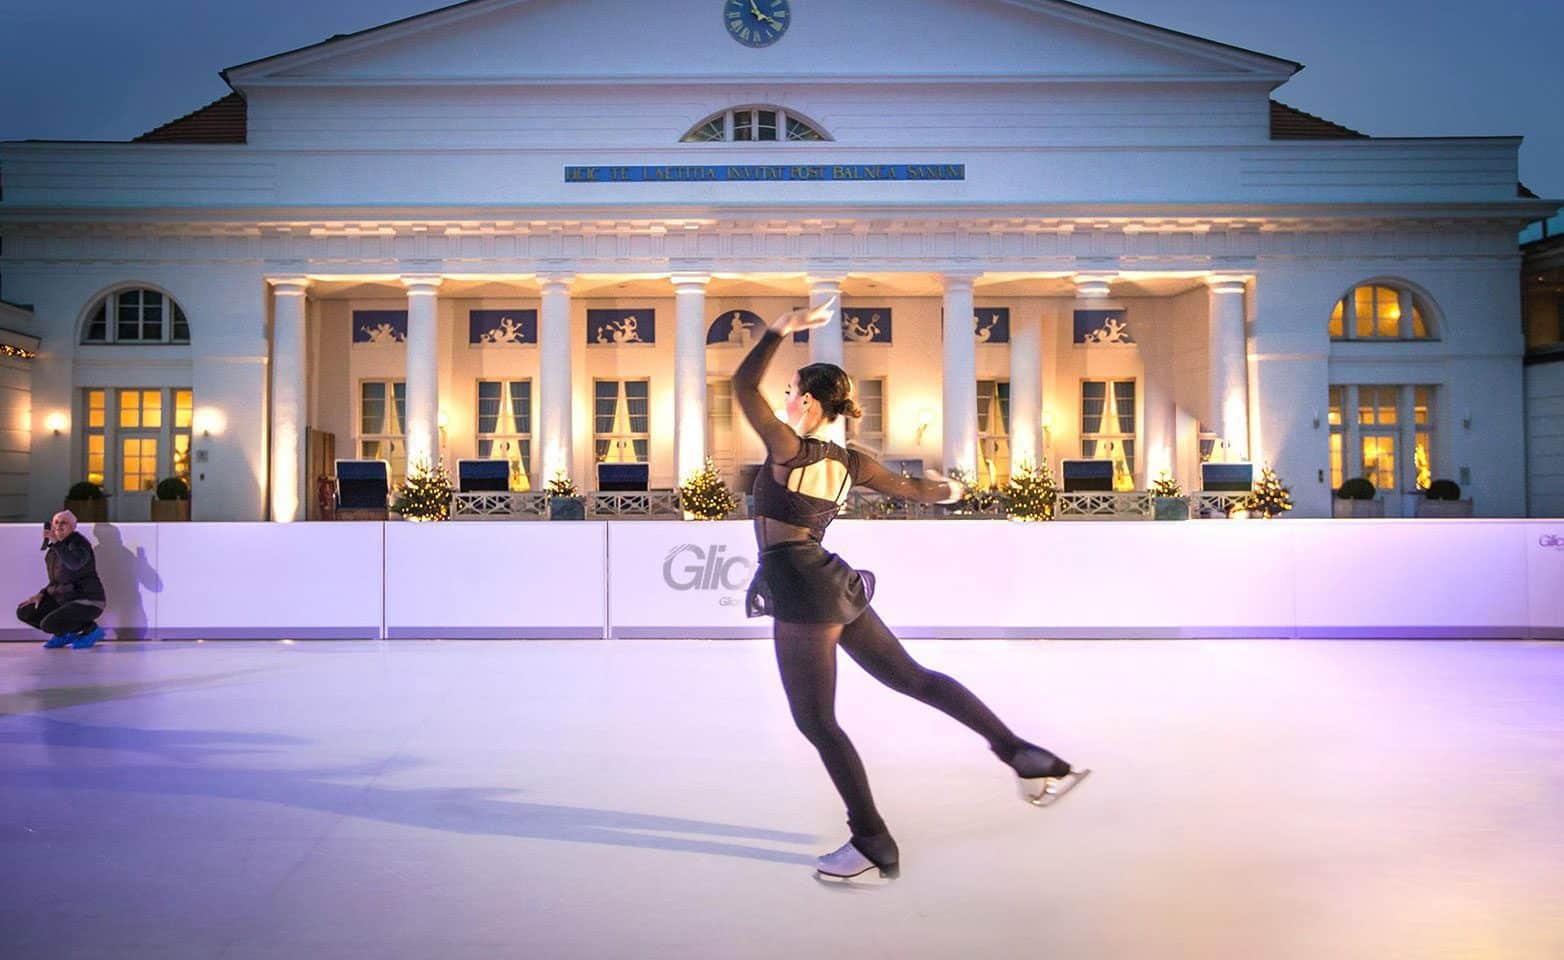 Professional figure skater Sarah Meier performing on artificial ice rink